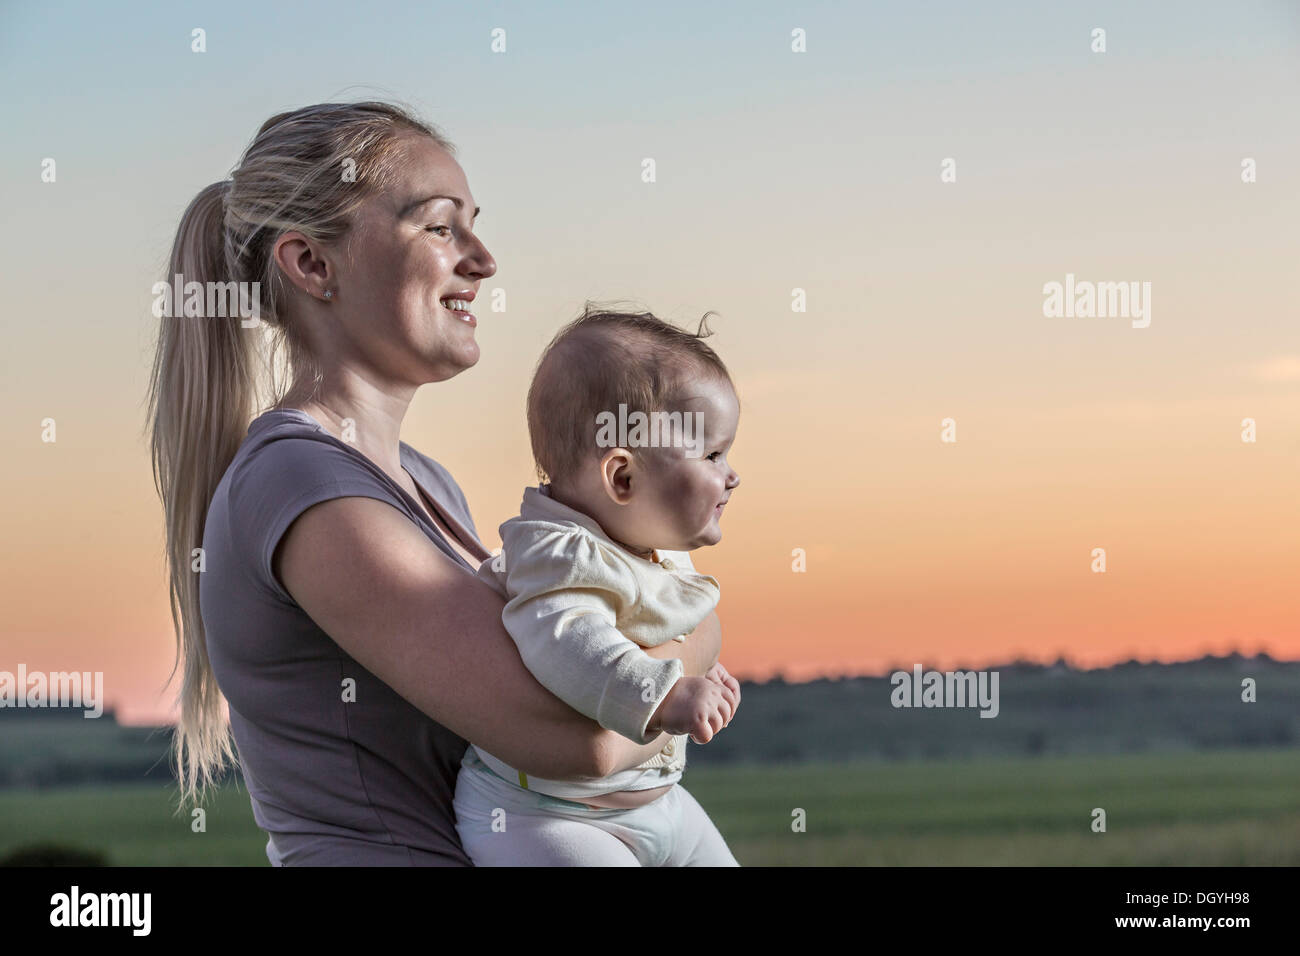 A laughing woman holding her baby in a natural setting Stock Photo